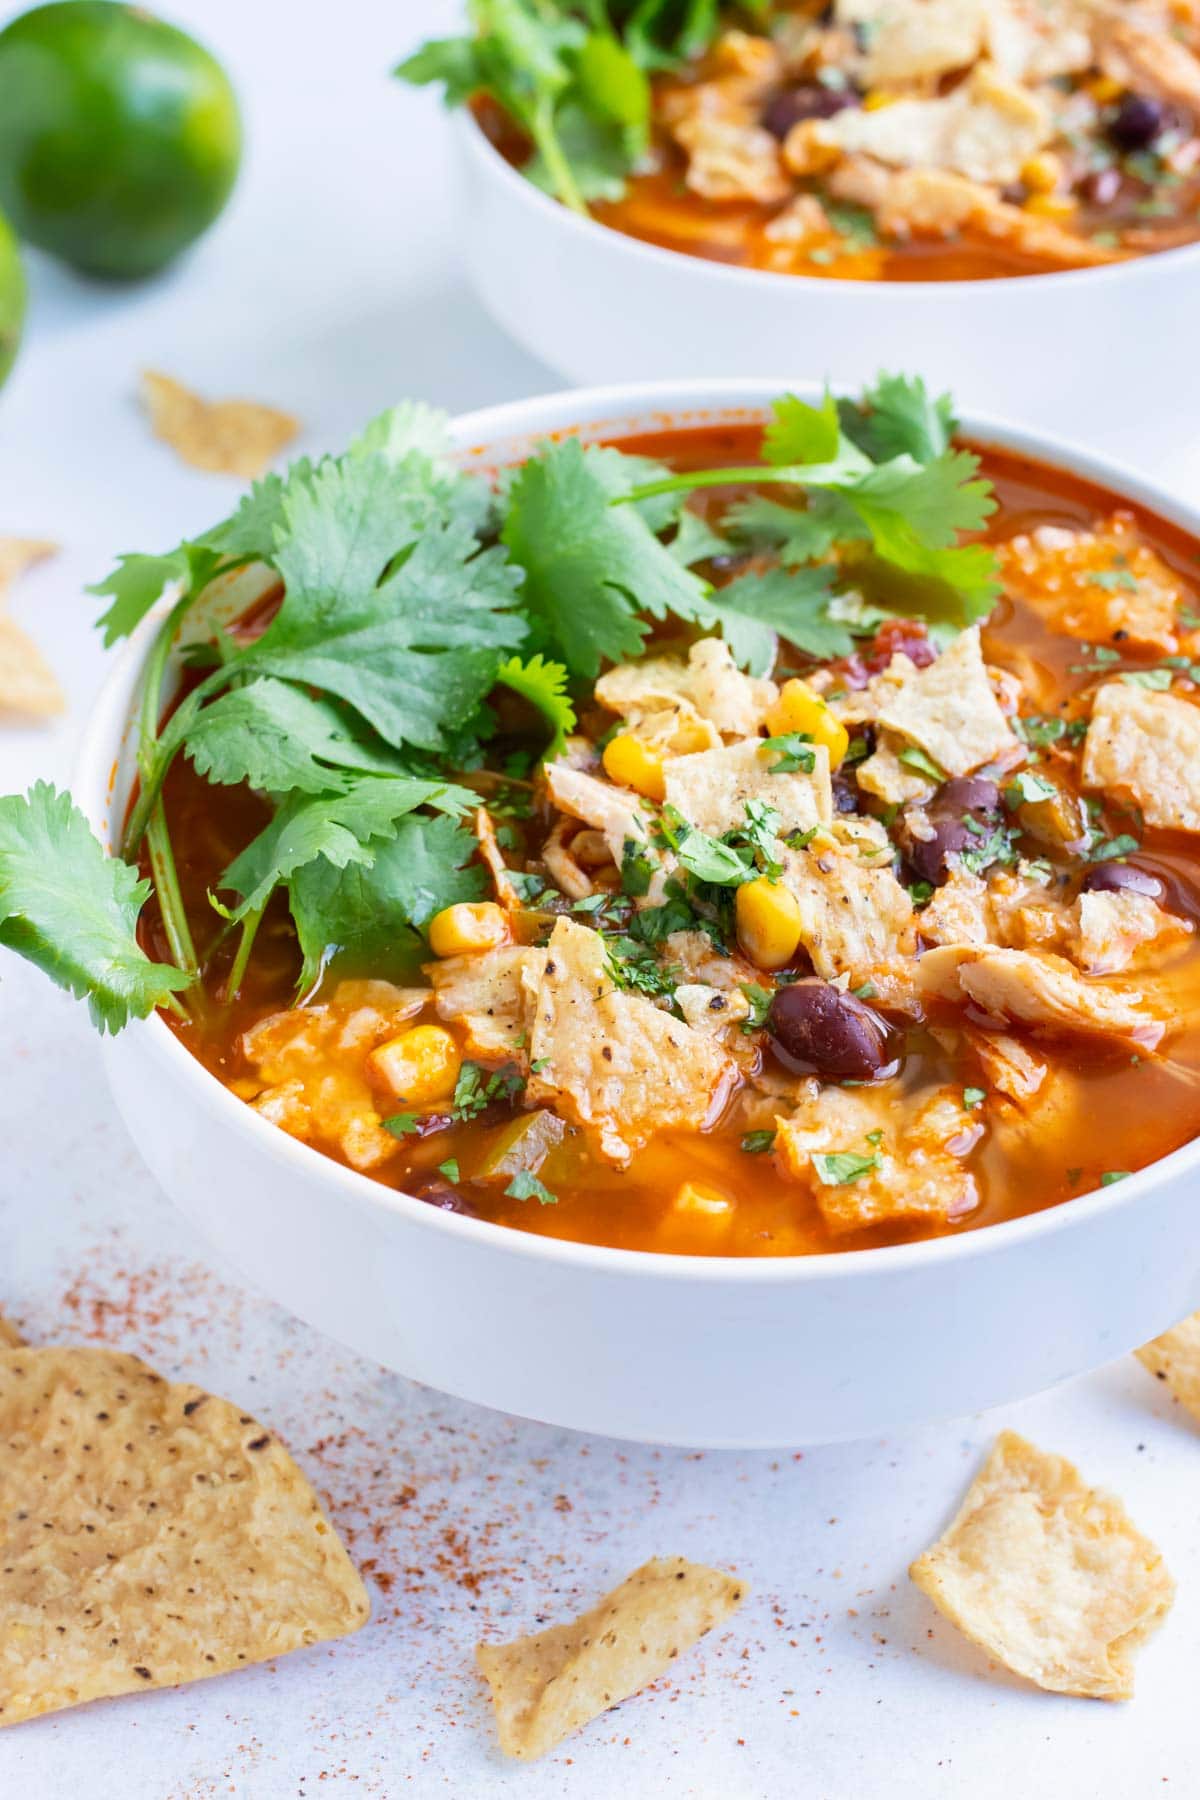 Mexican chicken tortilla is served in a bowl for a healthy dinner option.